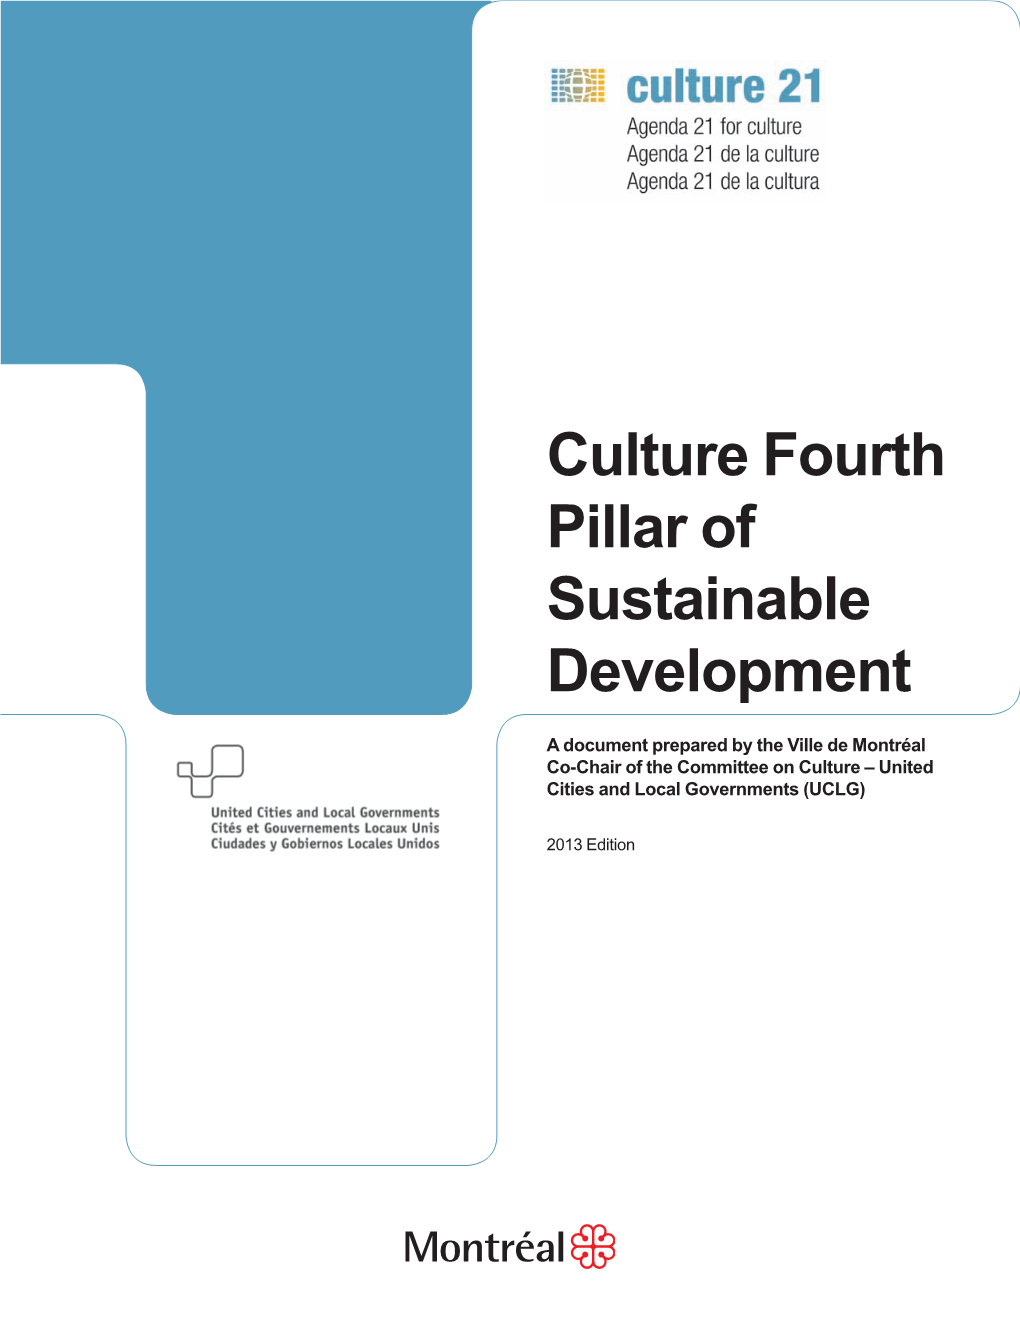 Culture Fourth Pillar of Sustainable Development, 2013